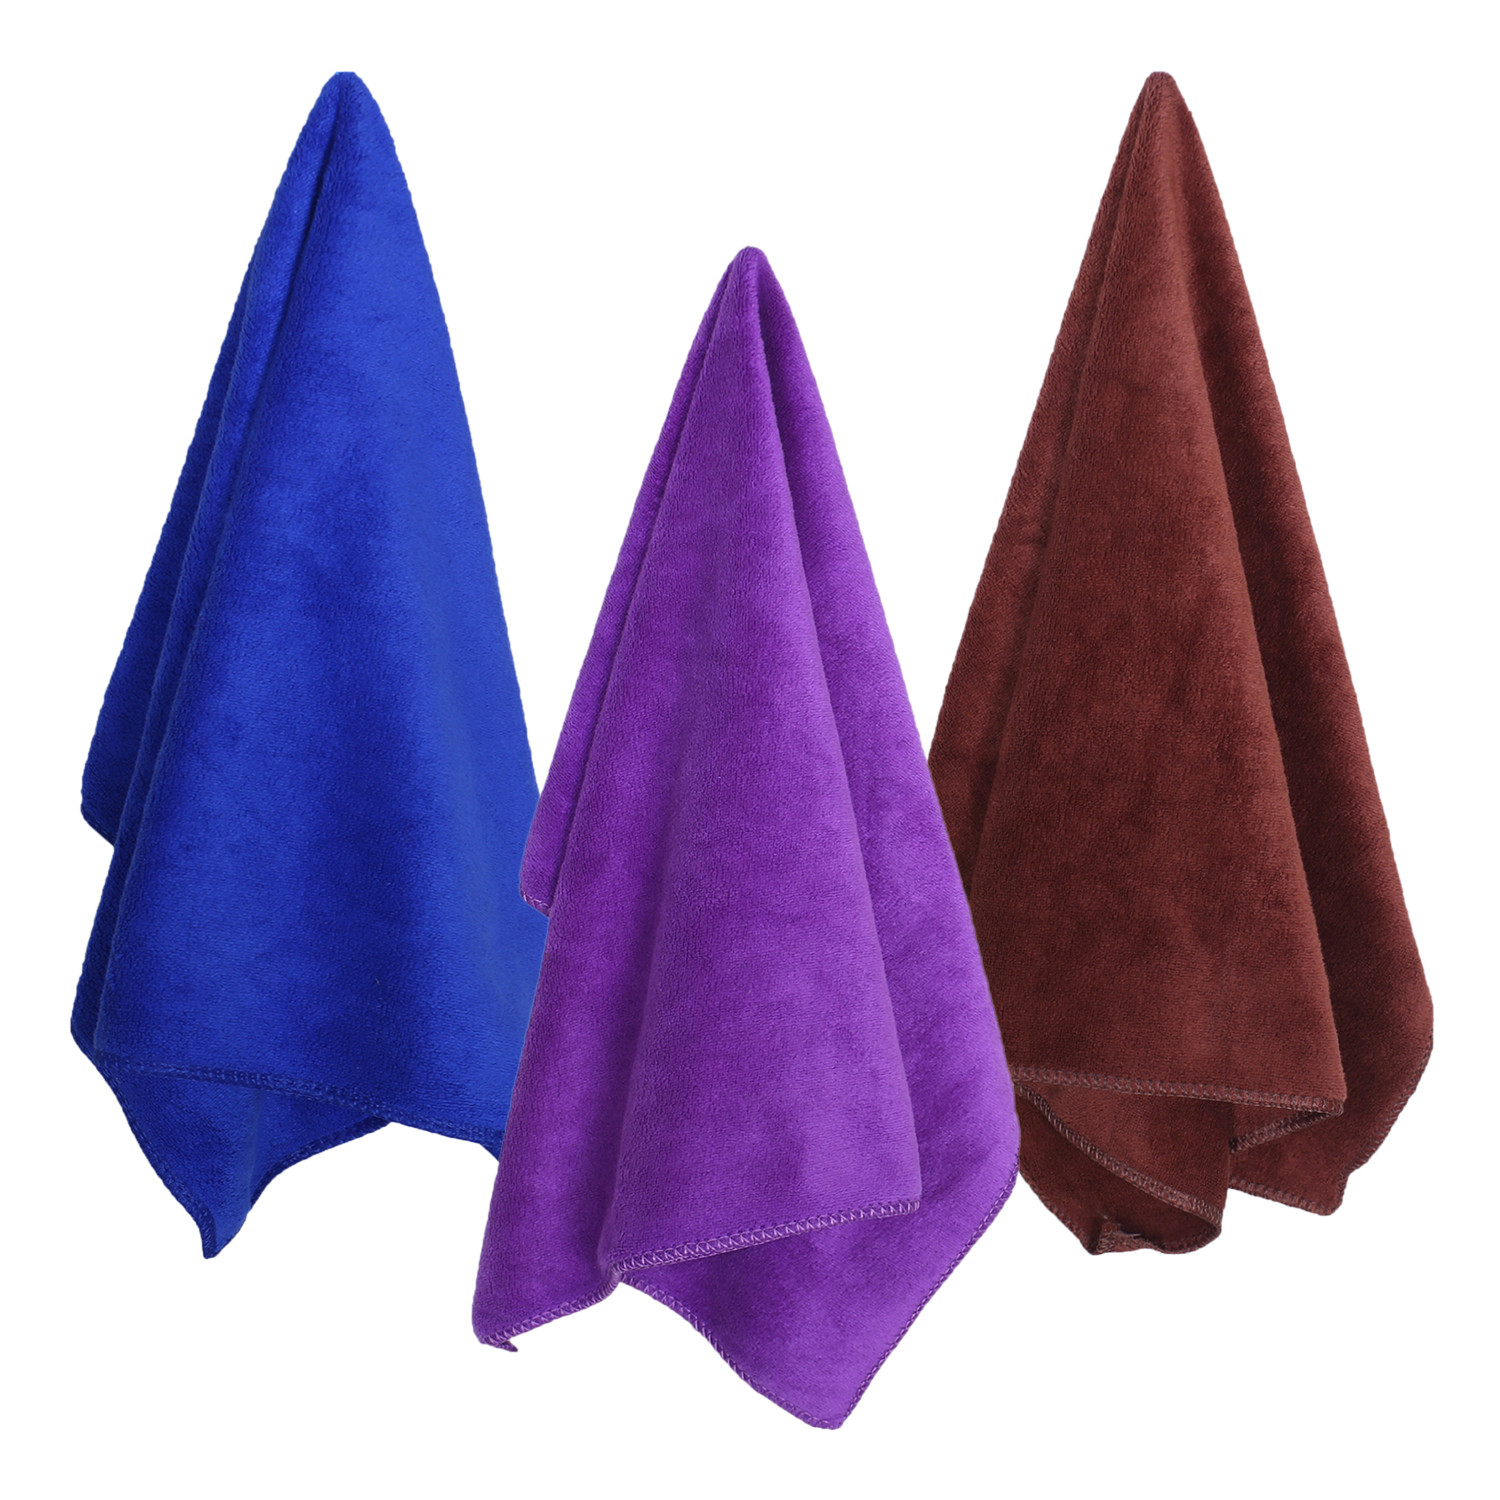 Kuber Industries Cleaning Cloths|Microfiber Highly Absorbent Wash Towels for Kitchen,Car,Window,24 x 16 Inch,Pack of 3 (Blue,Purple & Brown)